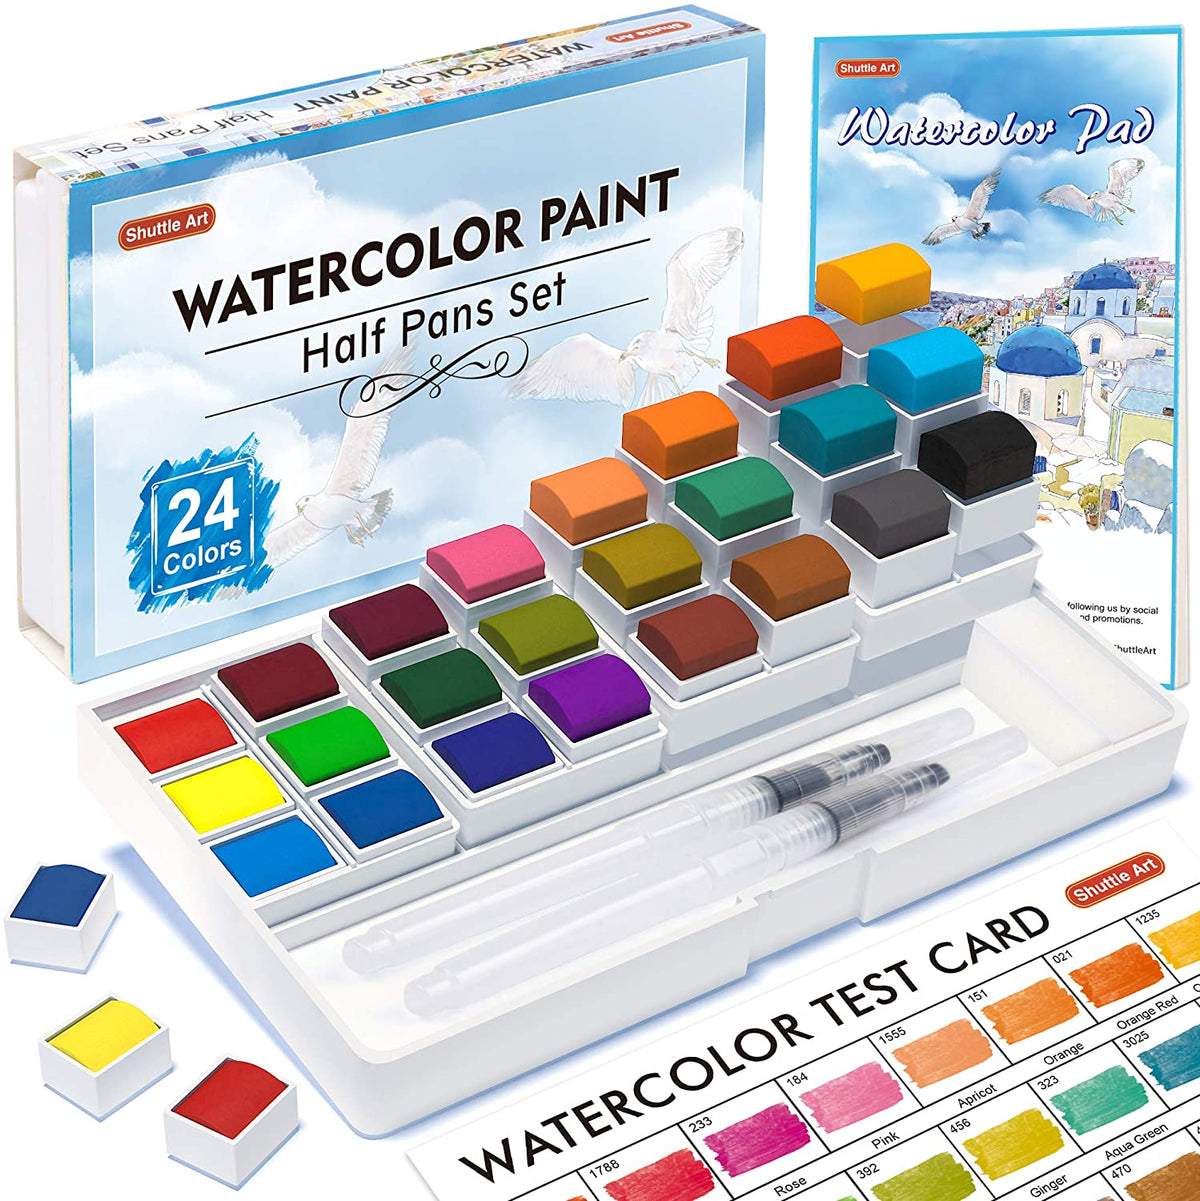 MAIKEDEPOT Watercolor Paint Set,30 Assorted Colors Painting Set Watercolor Sketching Kit with Water Brush Pens,24 Sheets Watercolor Papers,3 Online